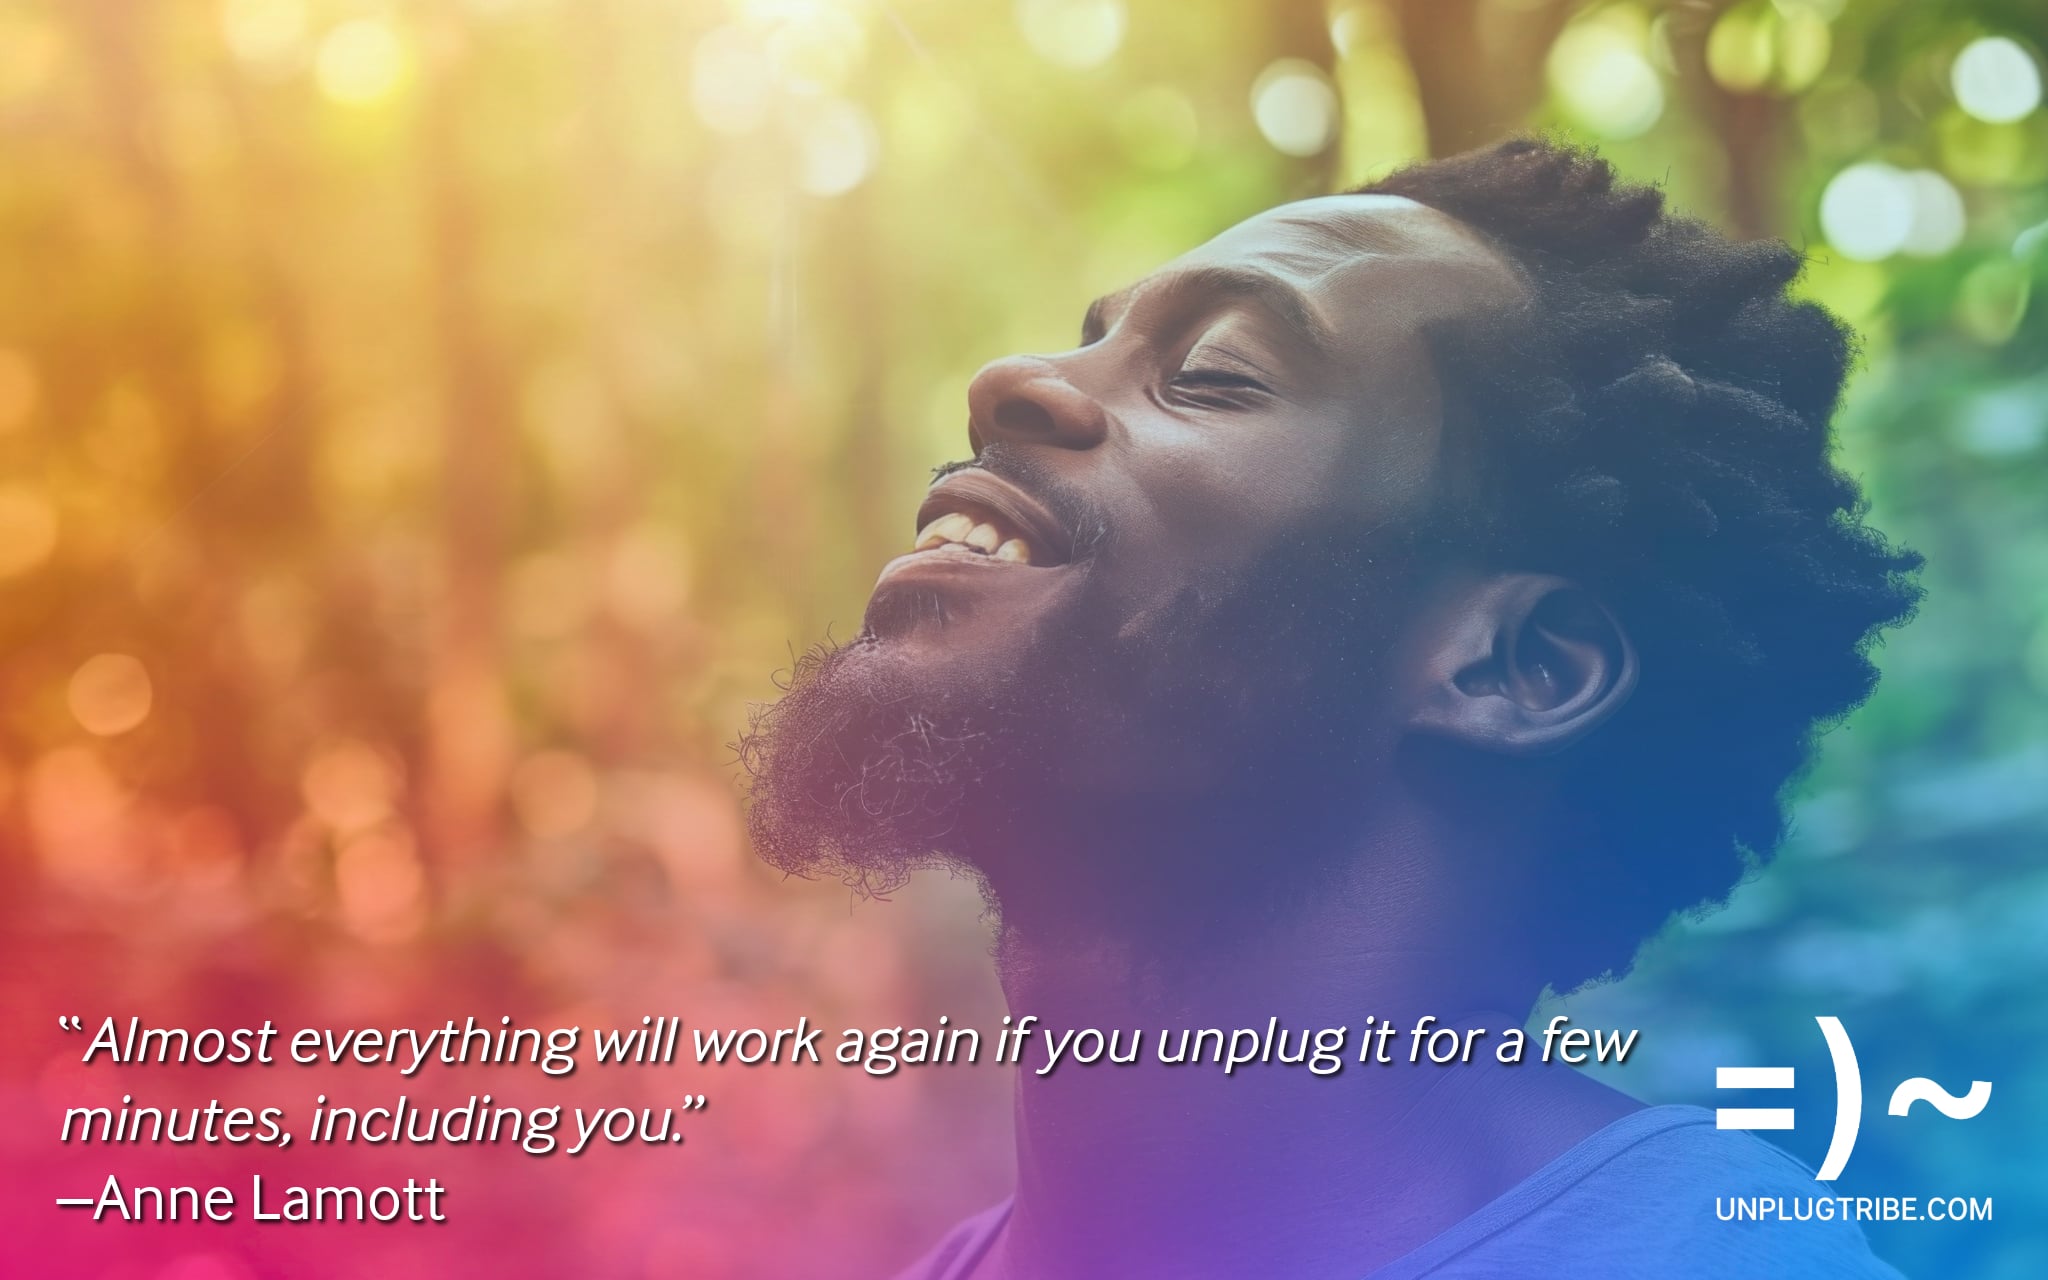 'Almost everything will work again if you unplug it for a few minutes, including you.' —Anne Lamott